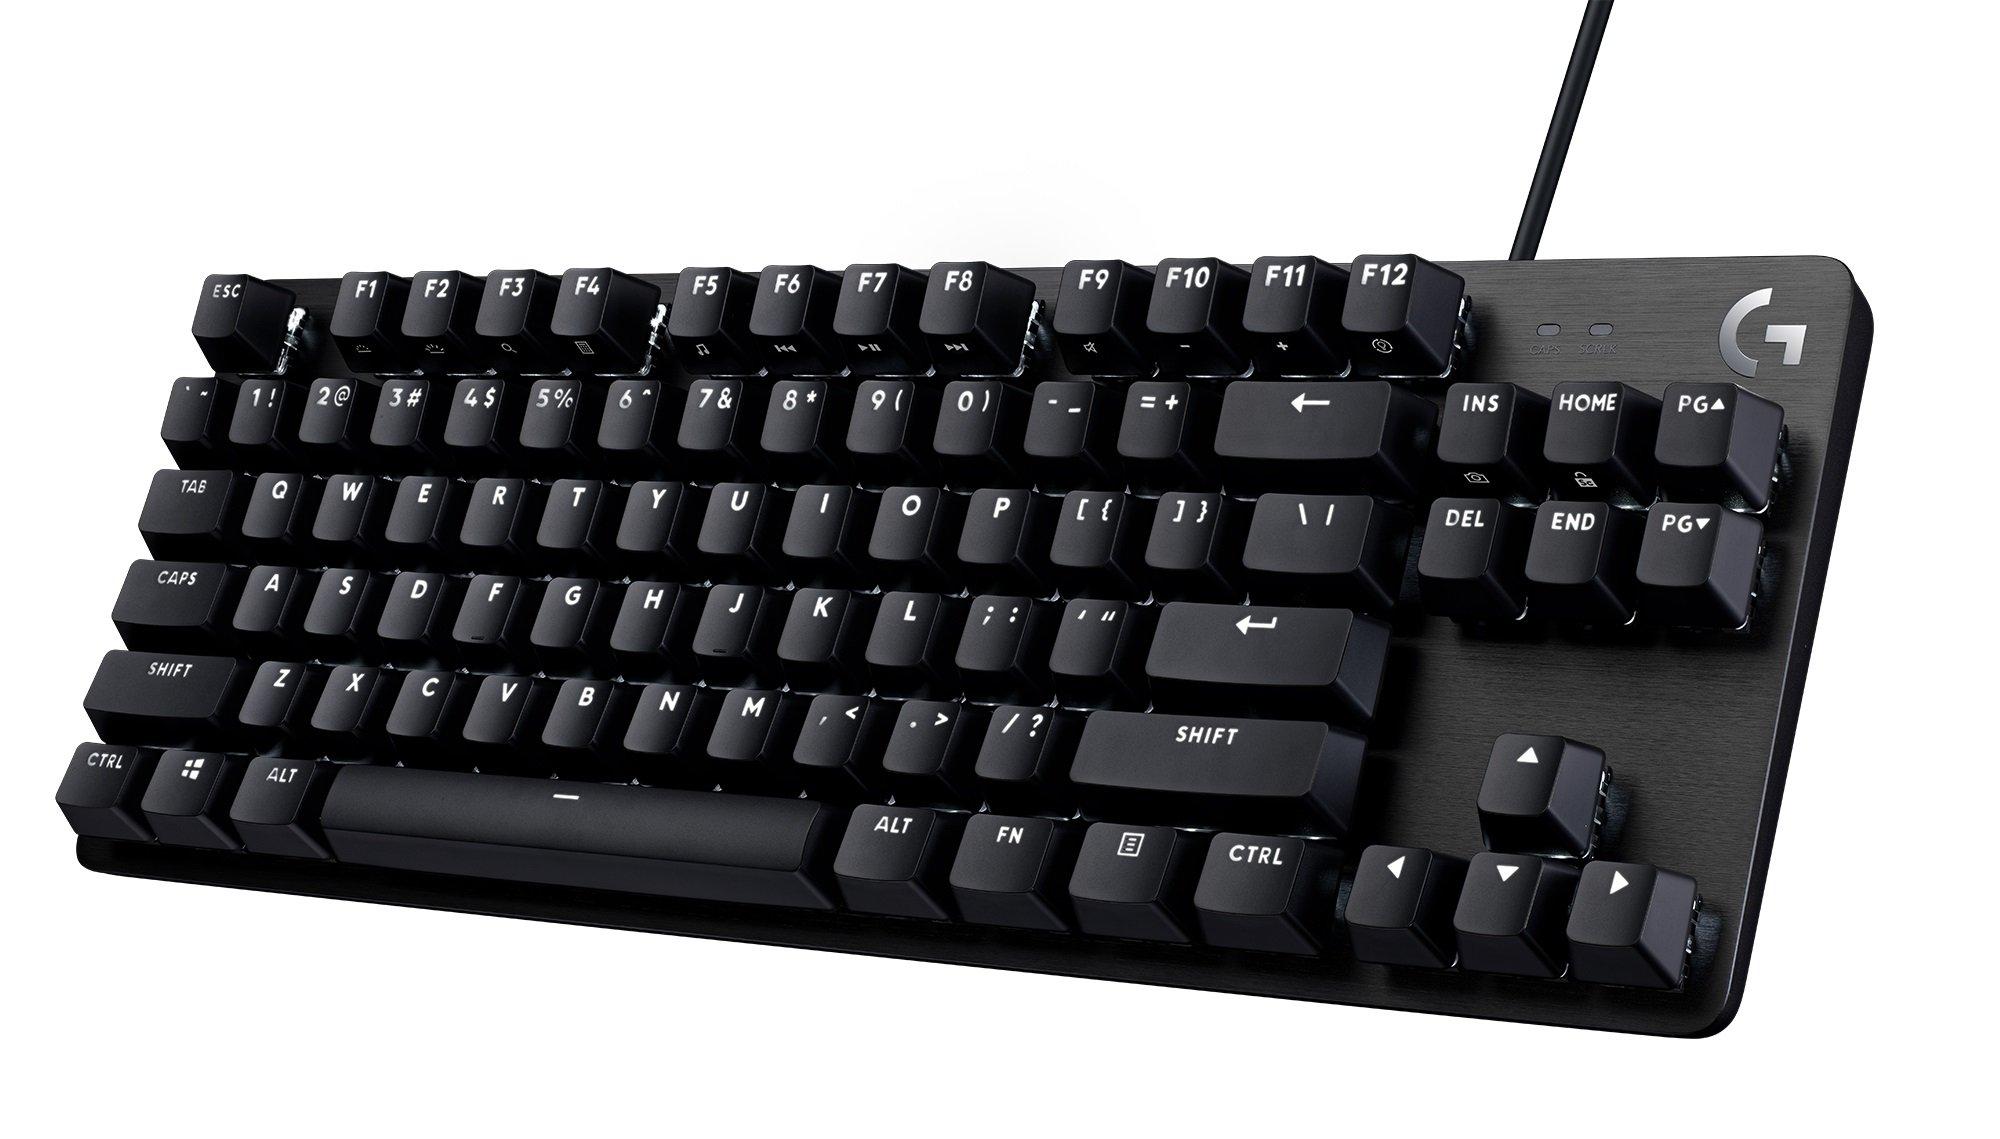  Logitech G413 TKL SE Mechanical Gaming Keyboard - Compact  Backlit Keyboard with Tactile Mechanical Switches, Anti-Ghosting,  Compatible with Windows, macOS - Black Aluminum (Renewed) : Video Games